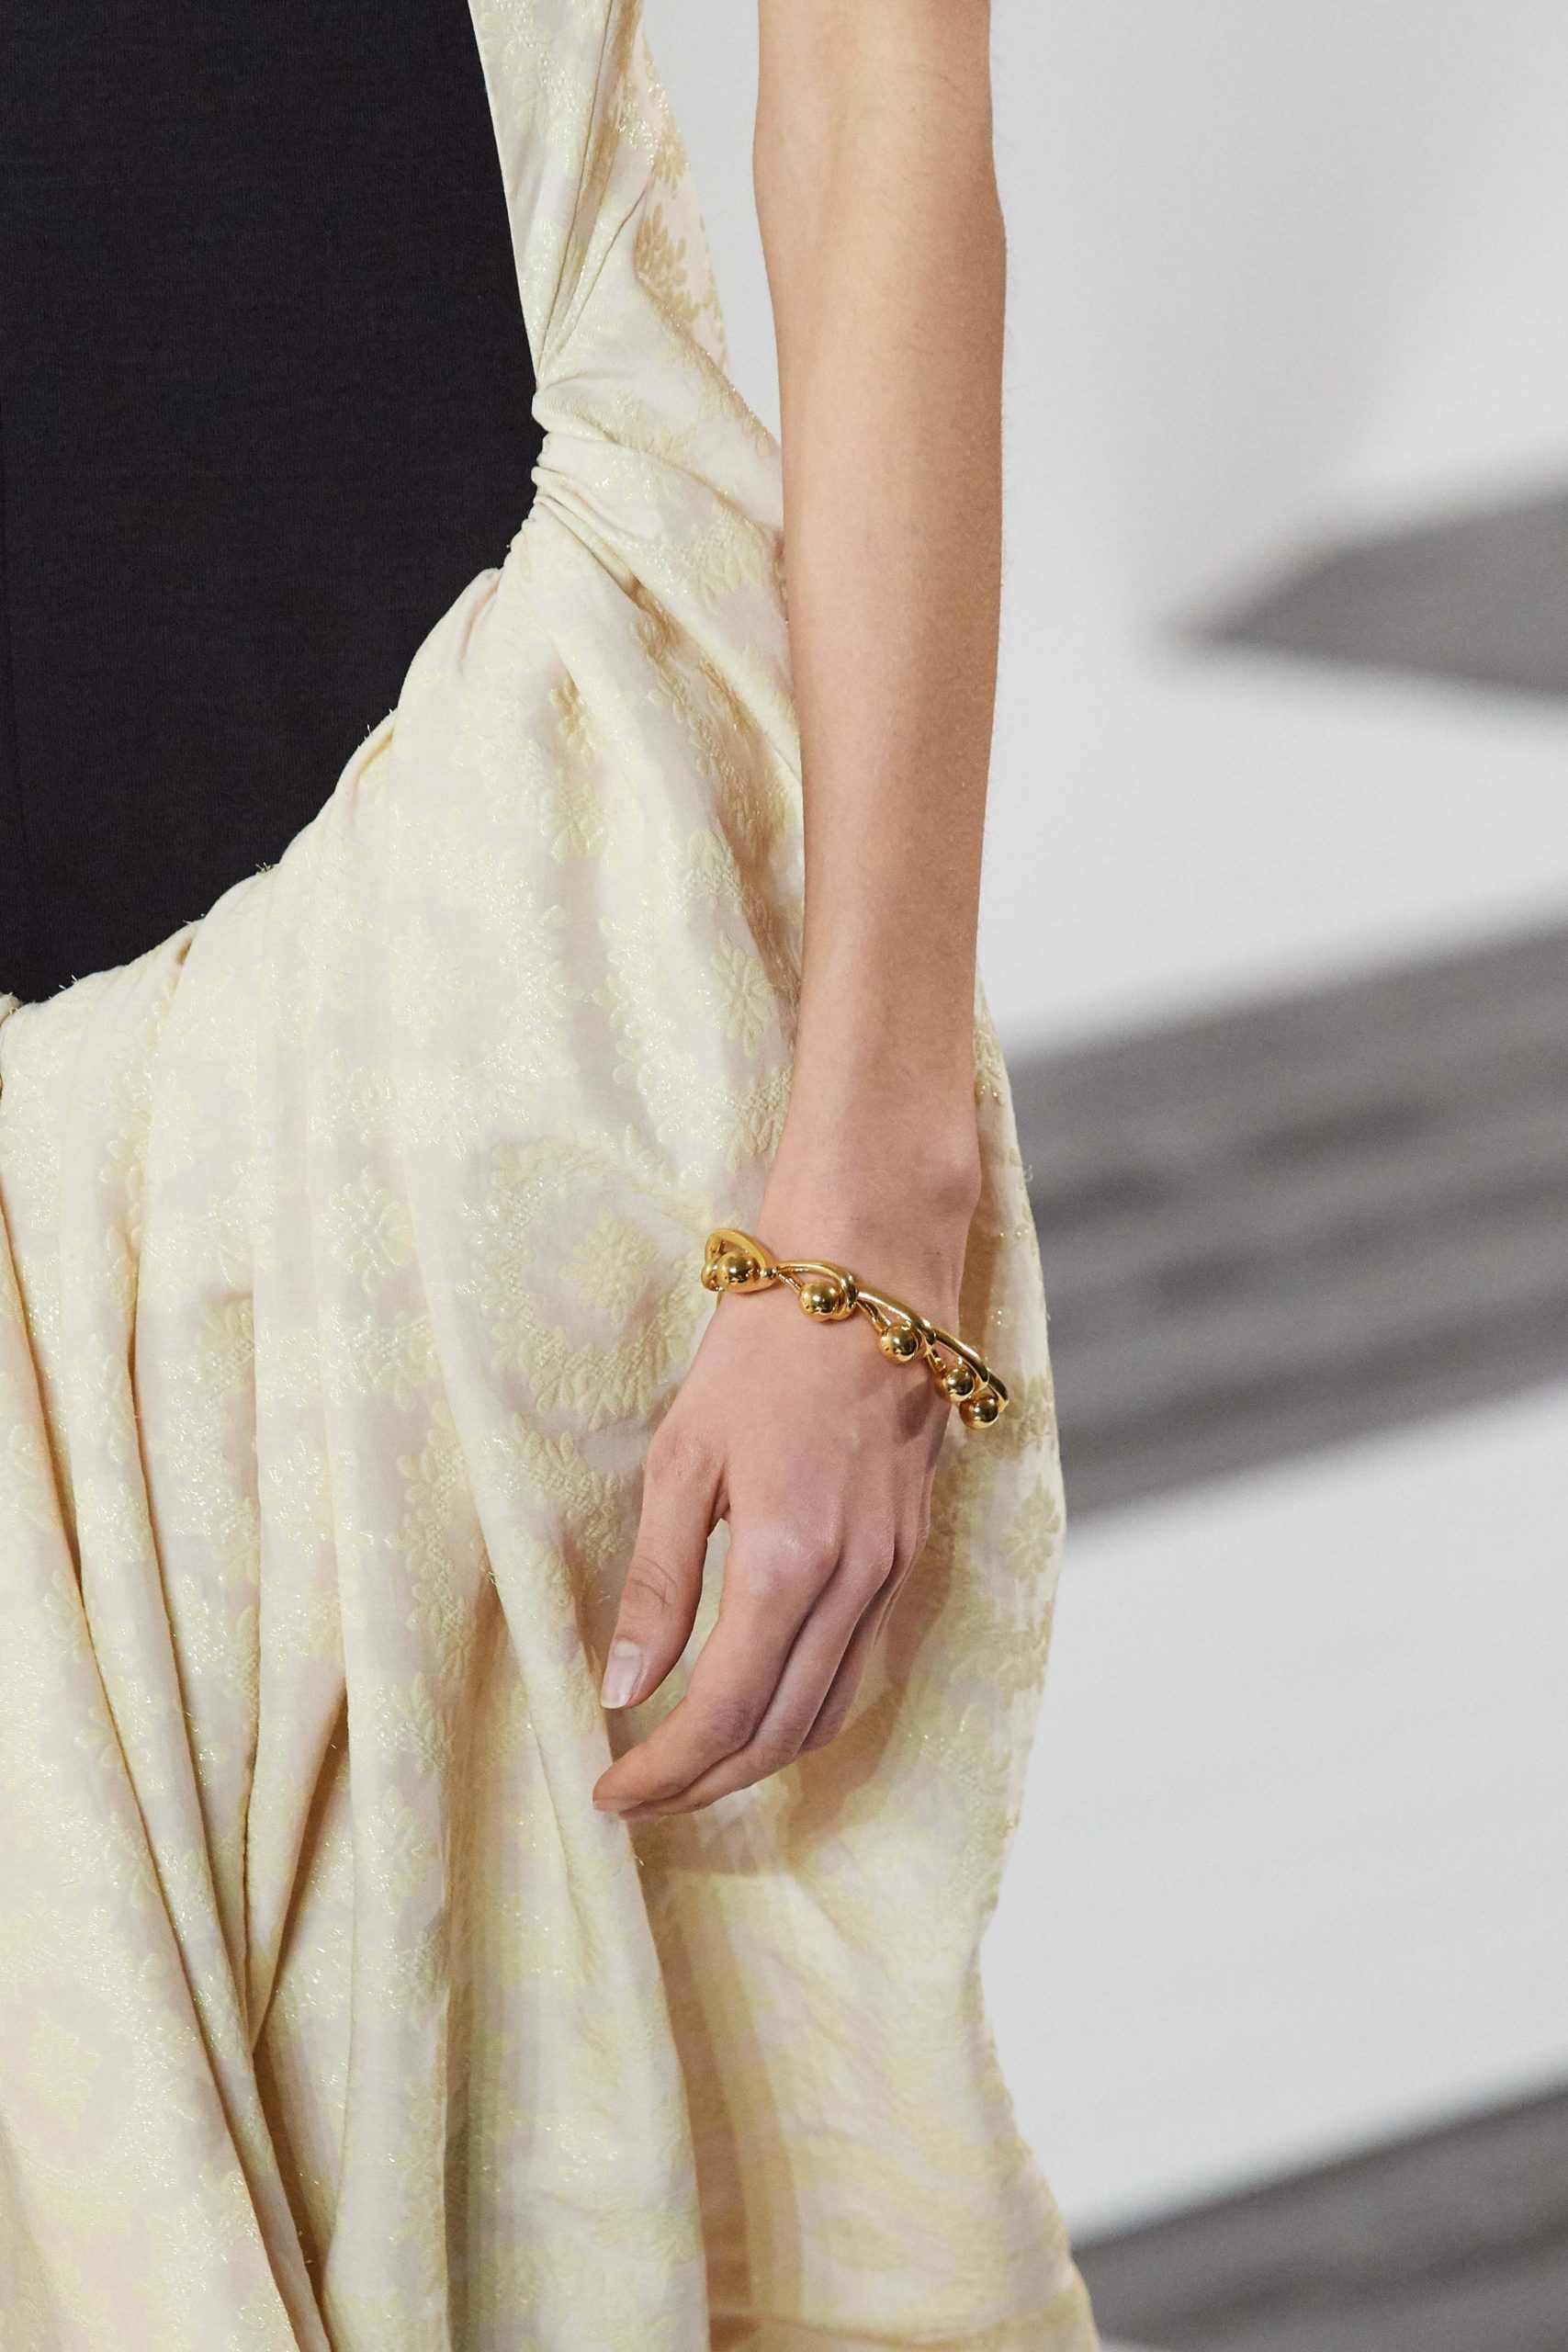 Loewe Fall 2020 trends runway coverage Ready To Wear Vogue bracelet best of accessories fall 2020